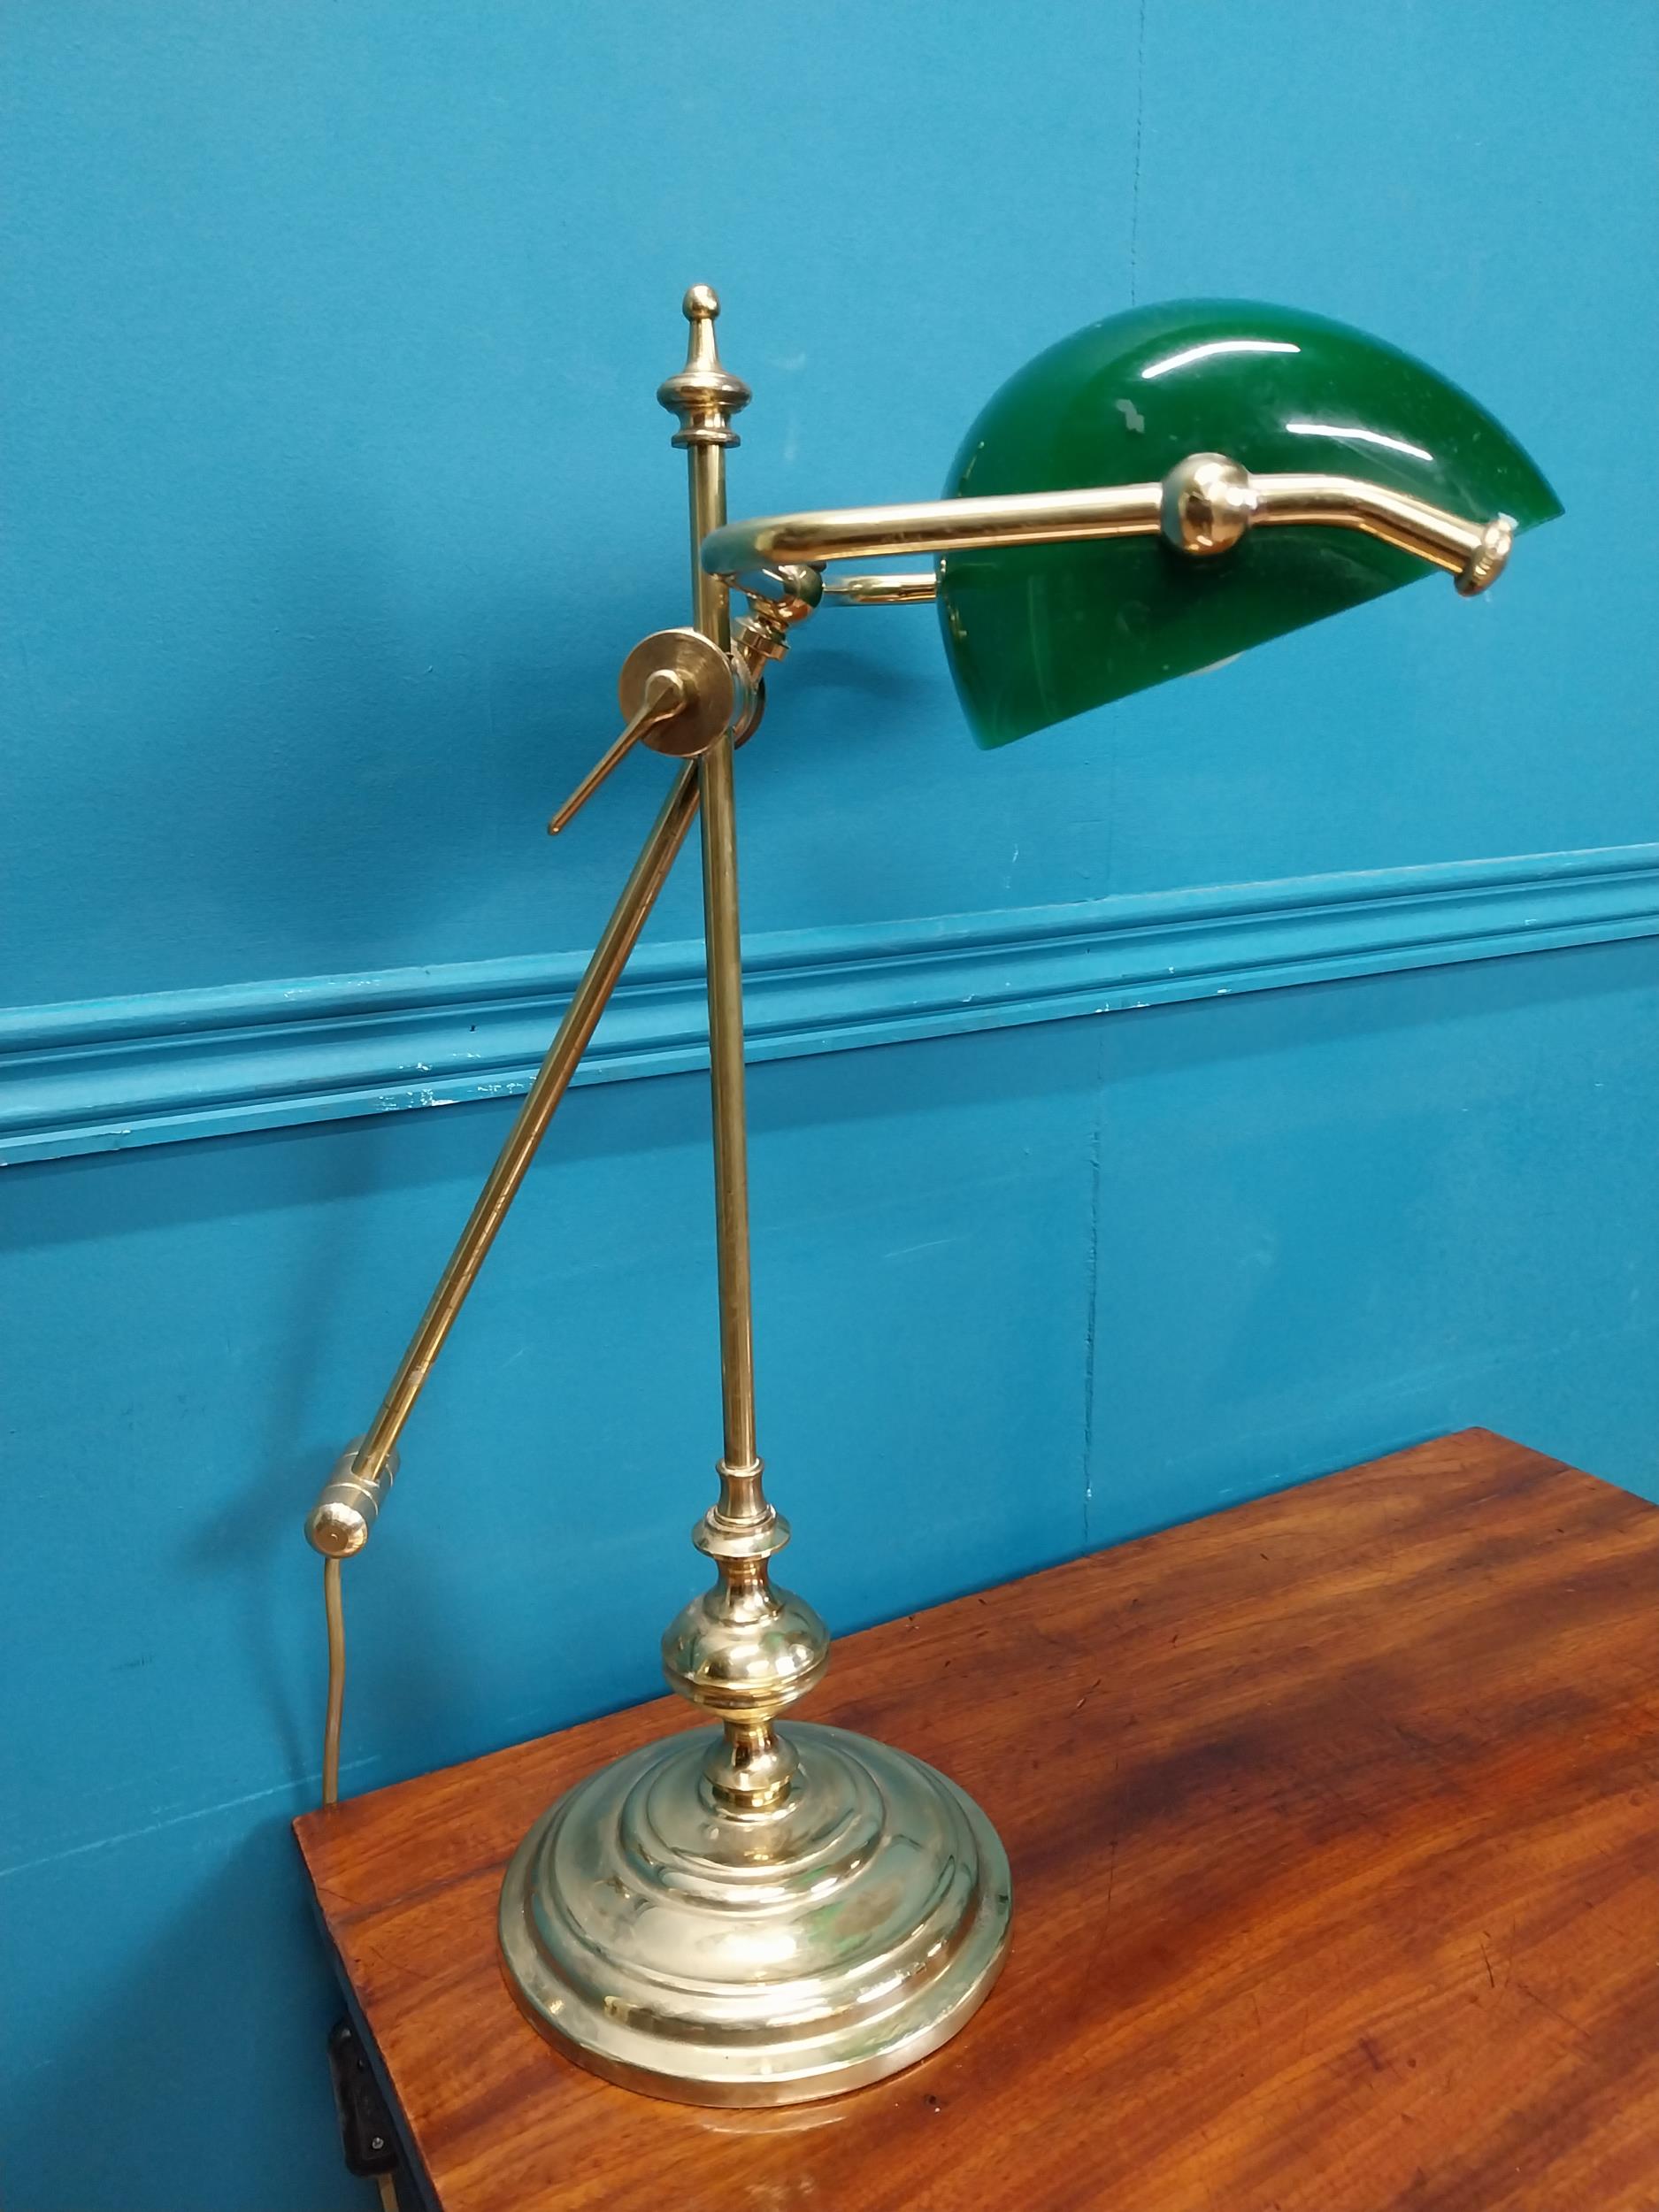 Good quality brass banker's lamp with green glass shade. {49 cm H x 26 cm W x 32 cm W}.